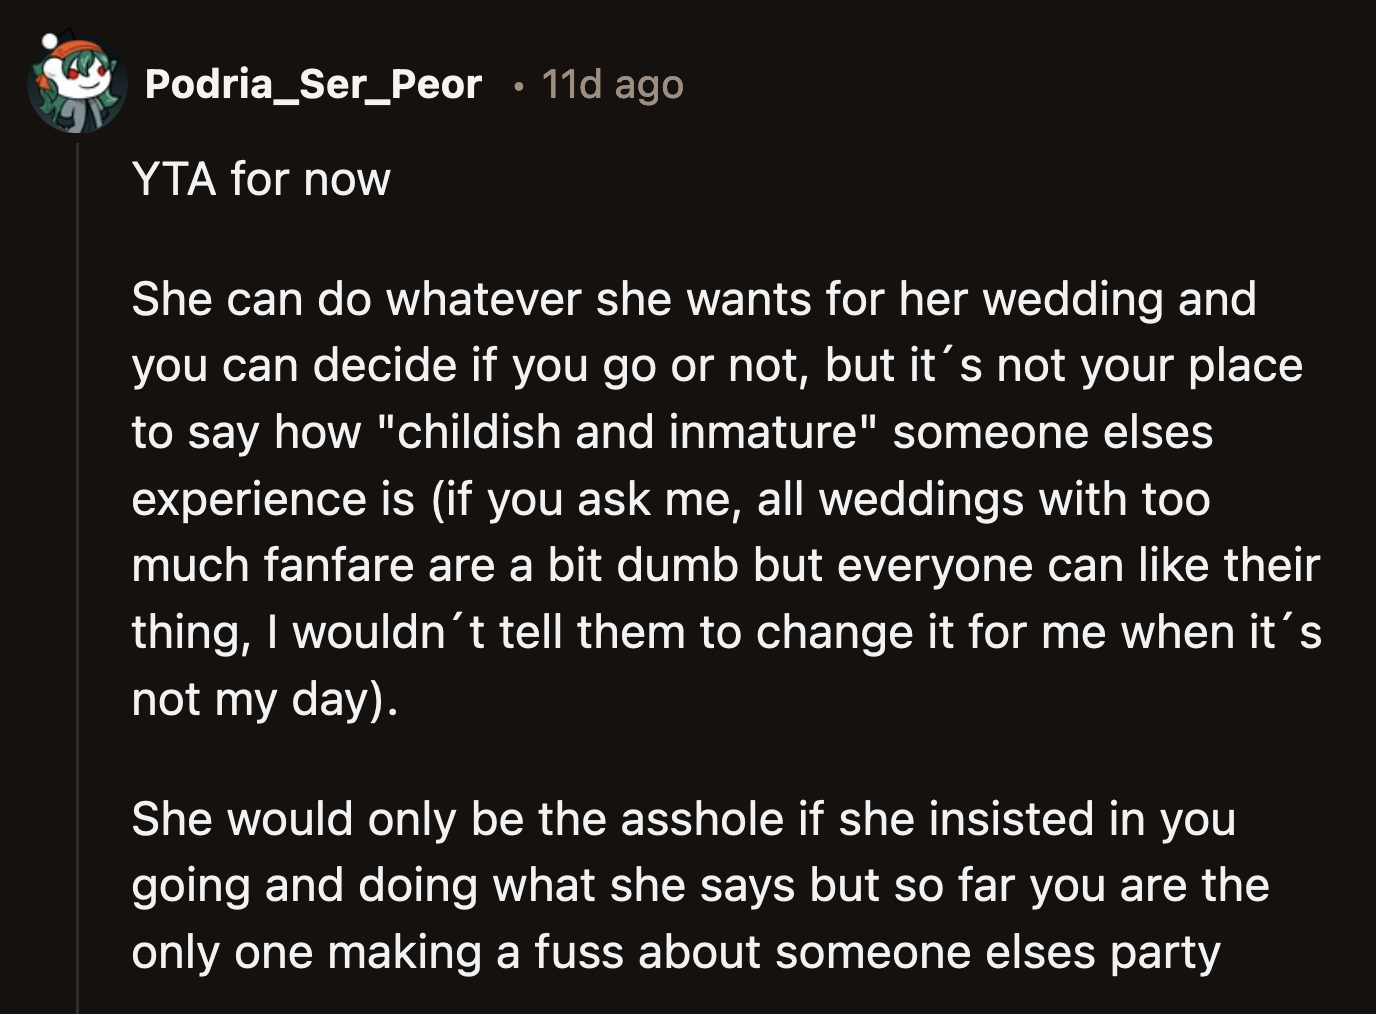 OP could have bowed out of the bridal party. She shouldn't have insulted her sister by calling her wedding theme childish and immature.